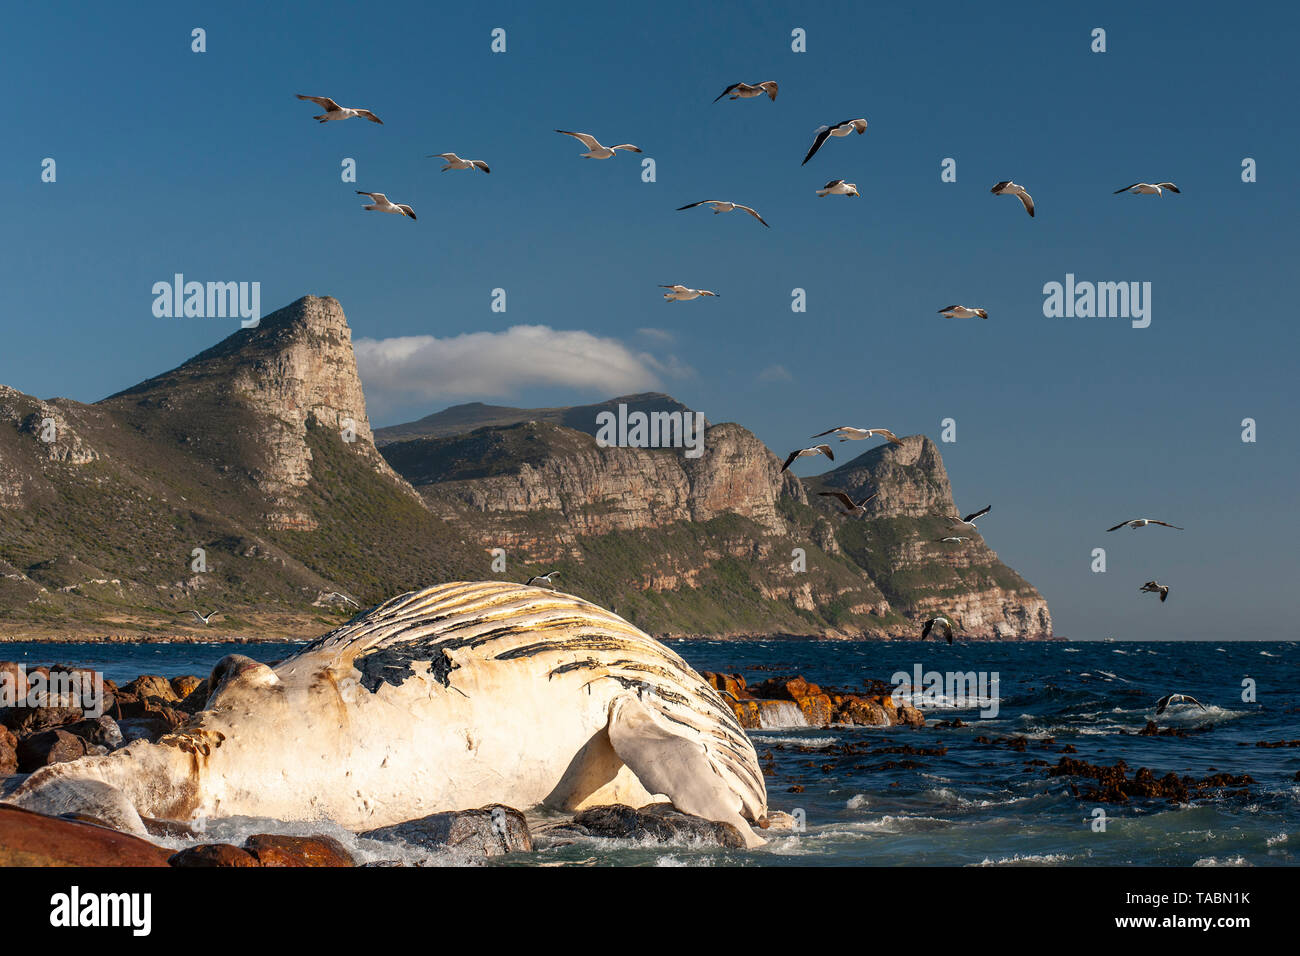 Carcass of a humpback whale on the shore of the Cape Point section of Table Mountain National Park in South Africa. Stock Photo